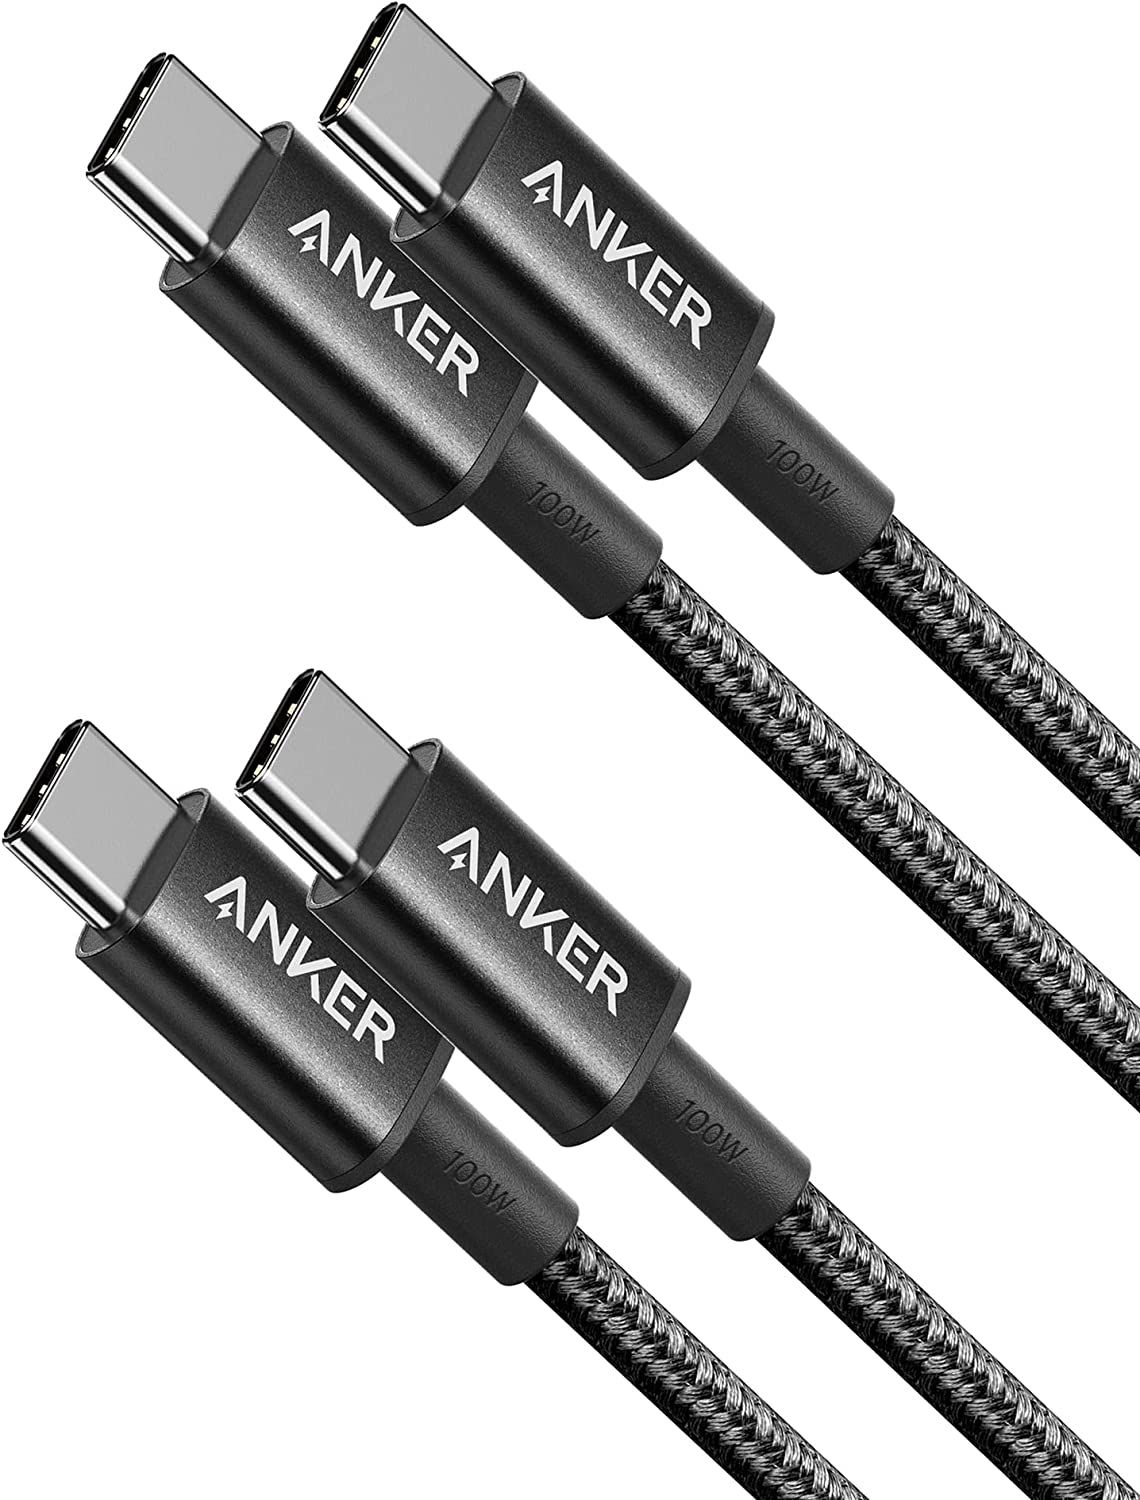 Anker 333 USB-C cable